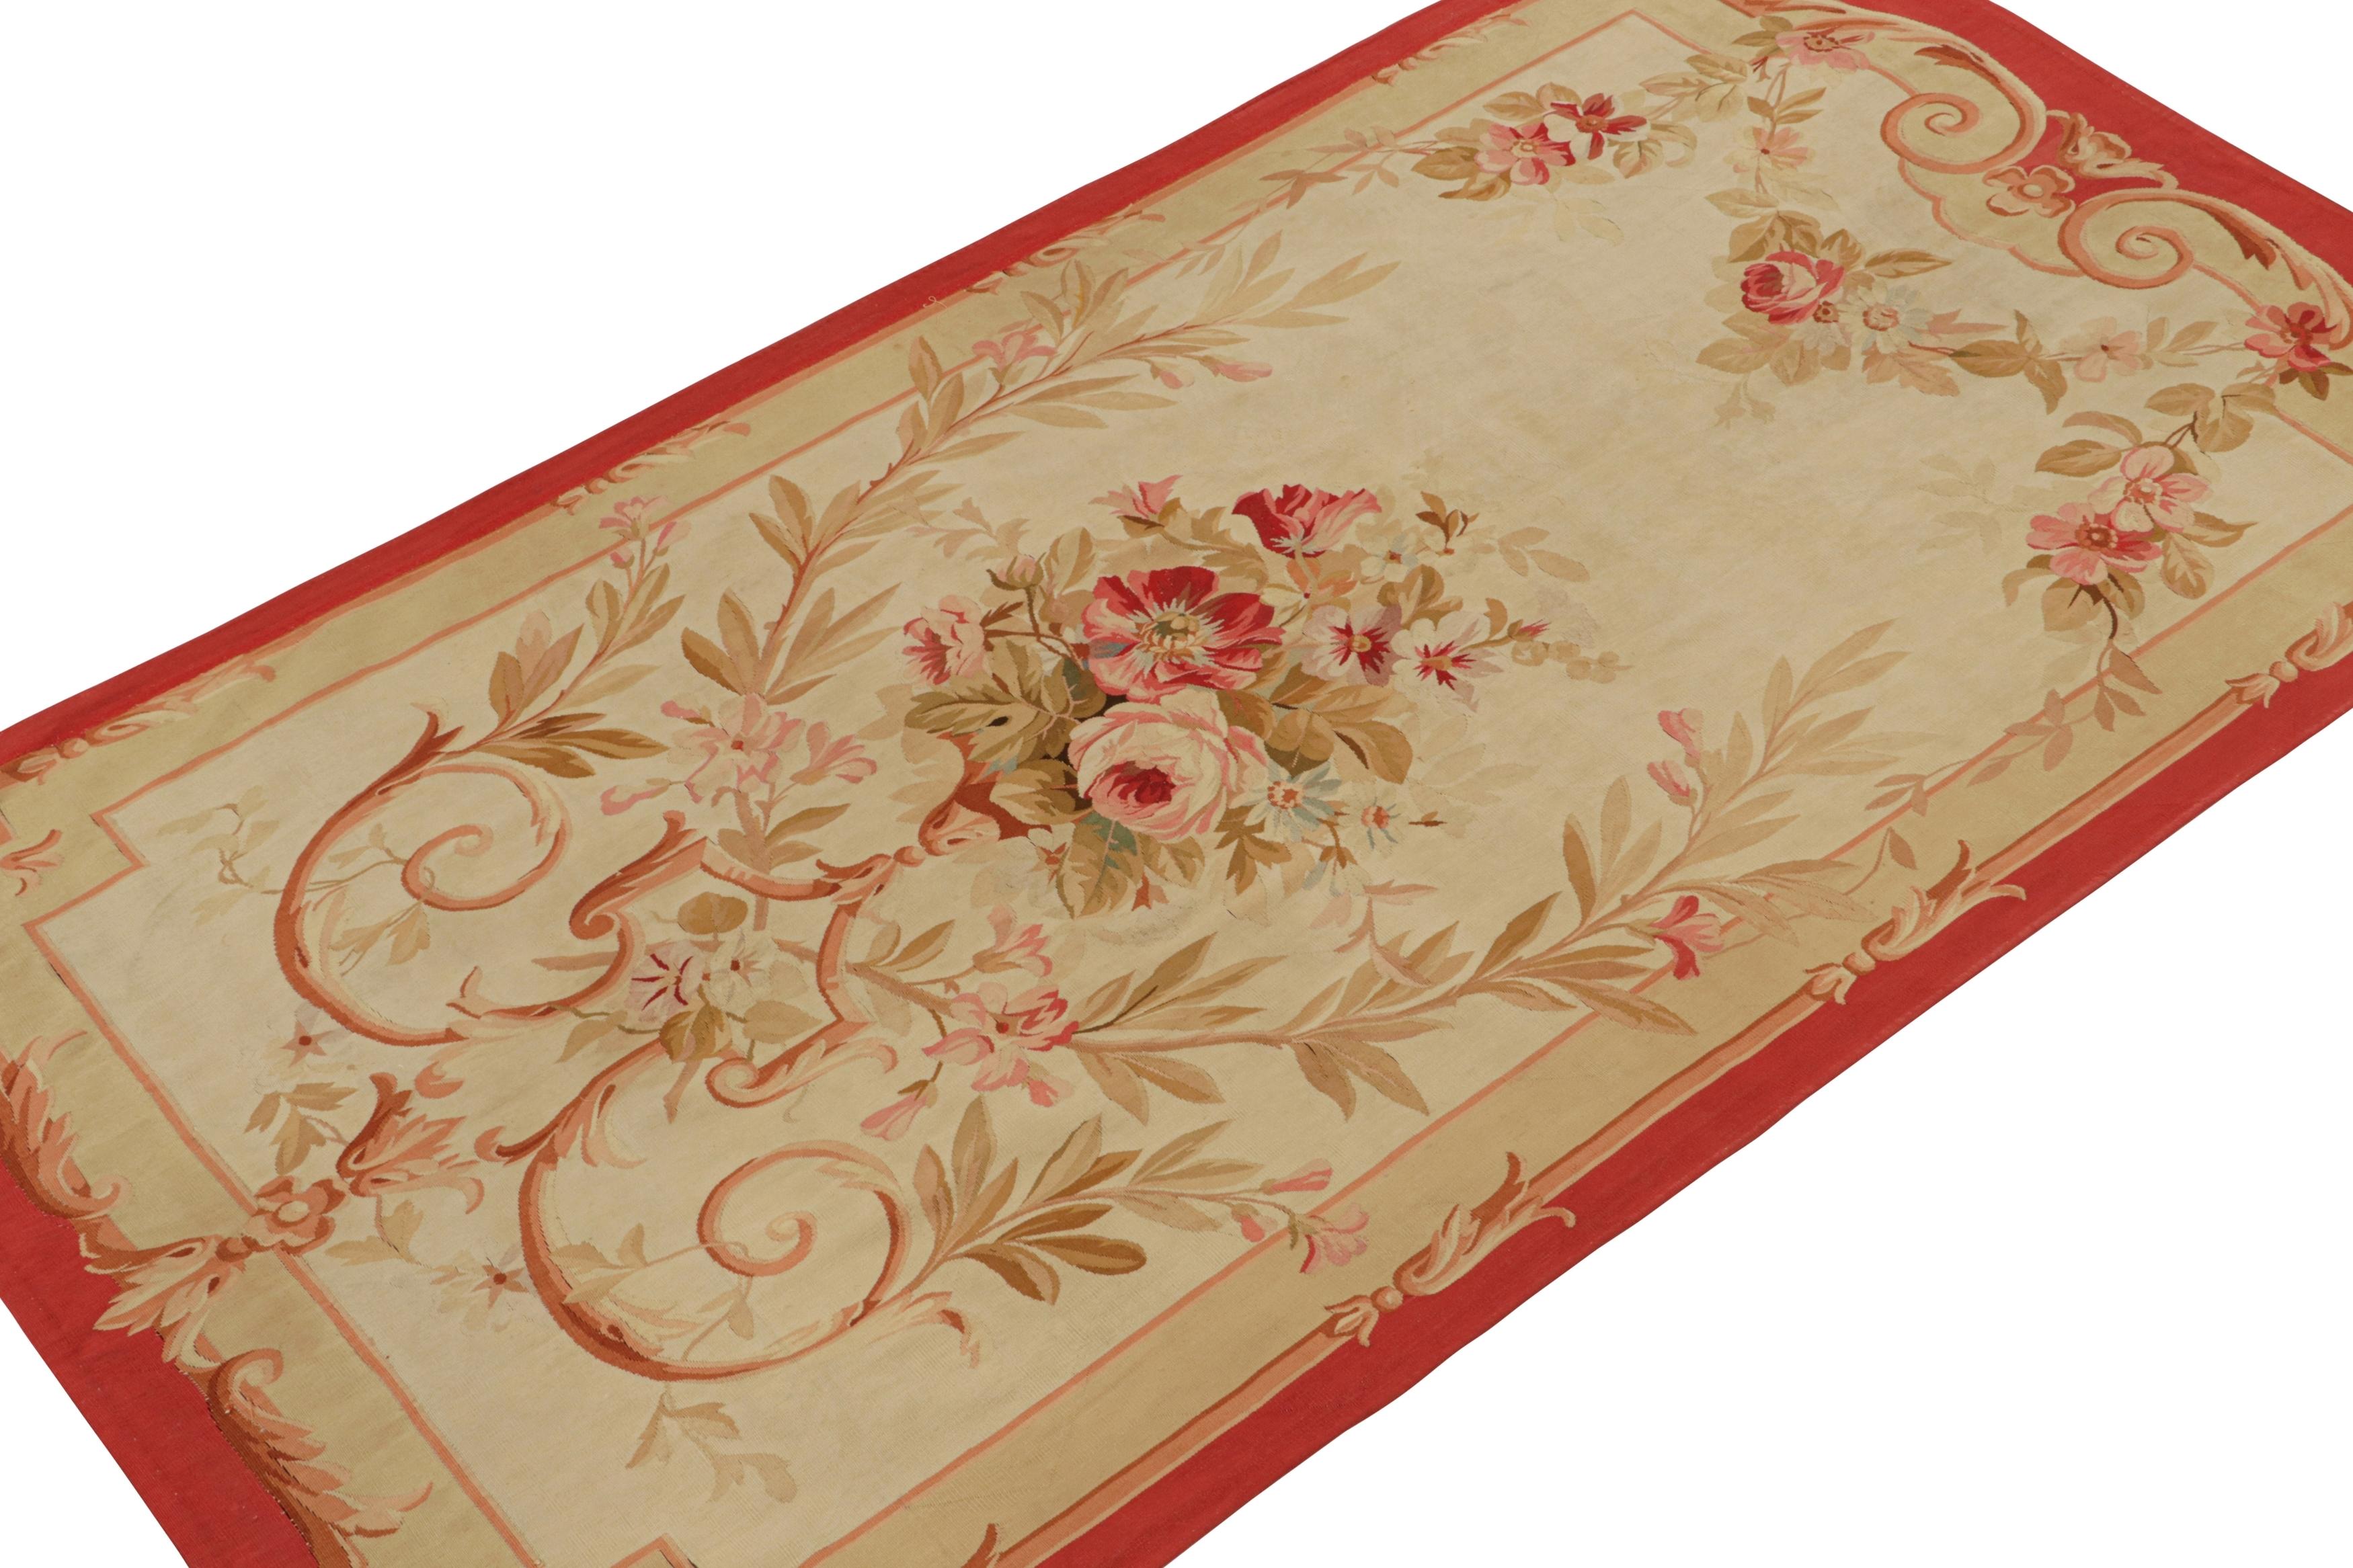 Featuring intricate floral patterns, this 5x10 antique Aubusson flatweave rug, with a beige and cream field, is handwoven in wool and originates from France, at the turn of the 19th century. 

On the design: 

Handwoven in wool, circa 1890-1900,